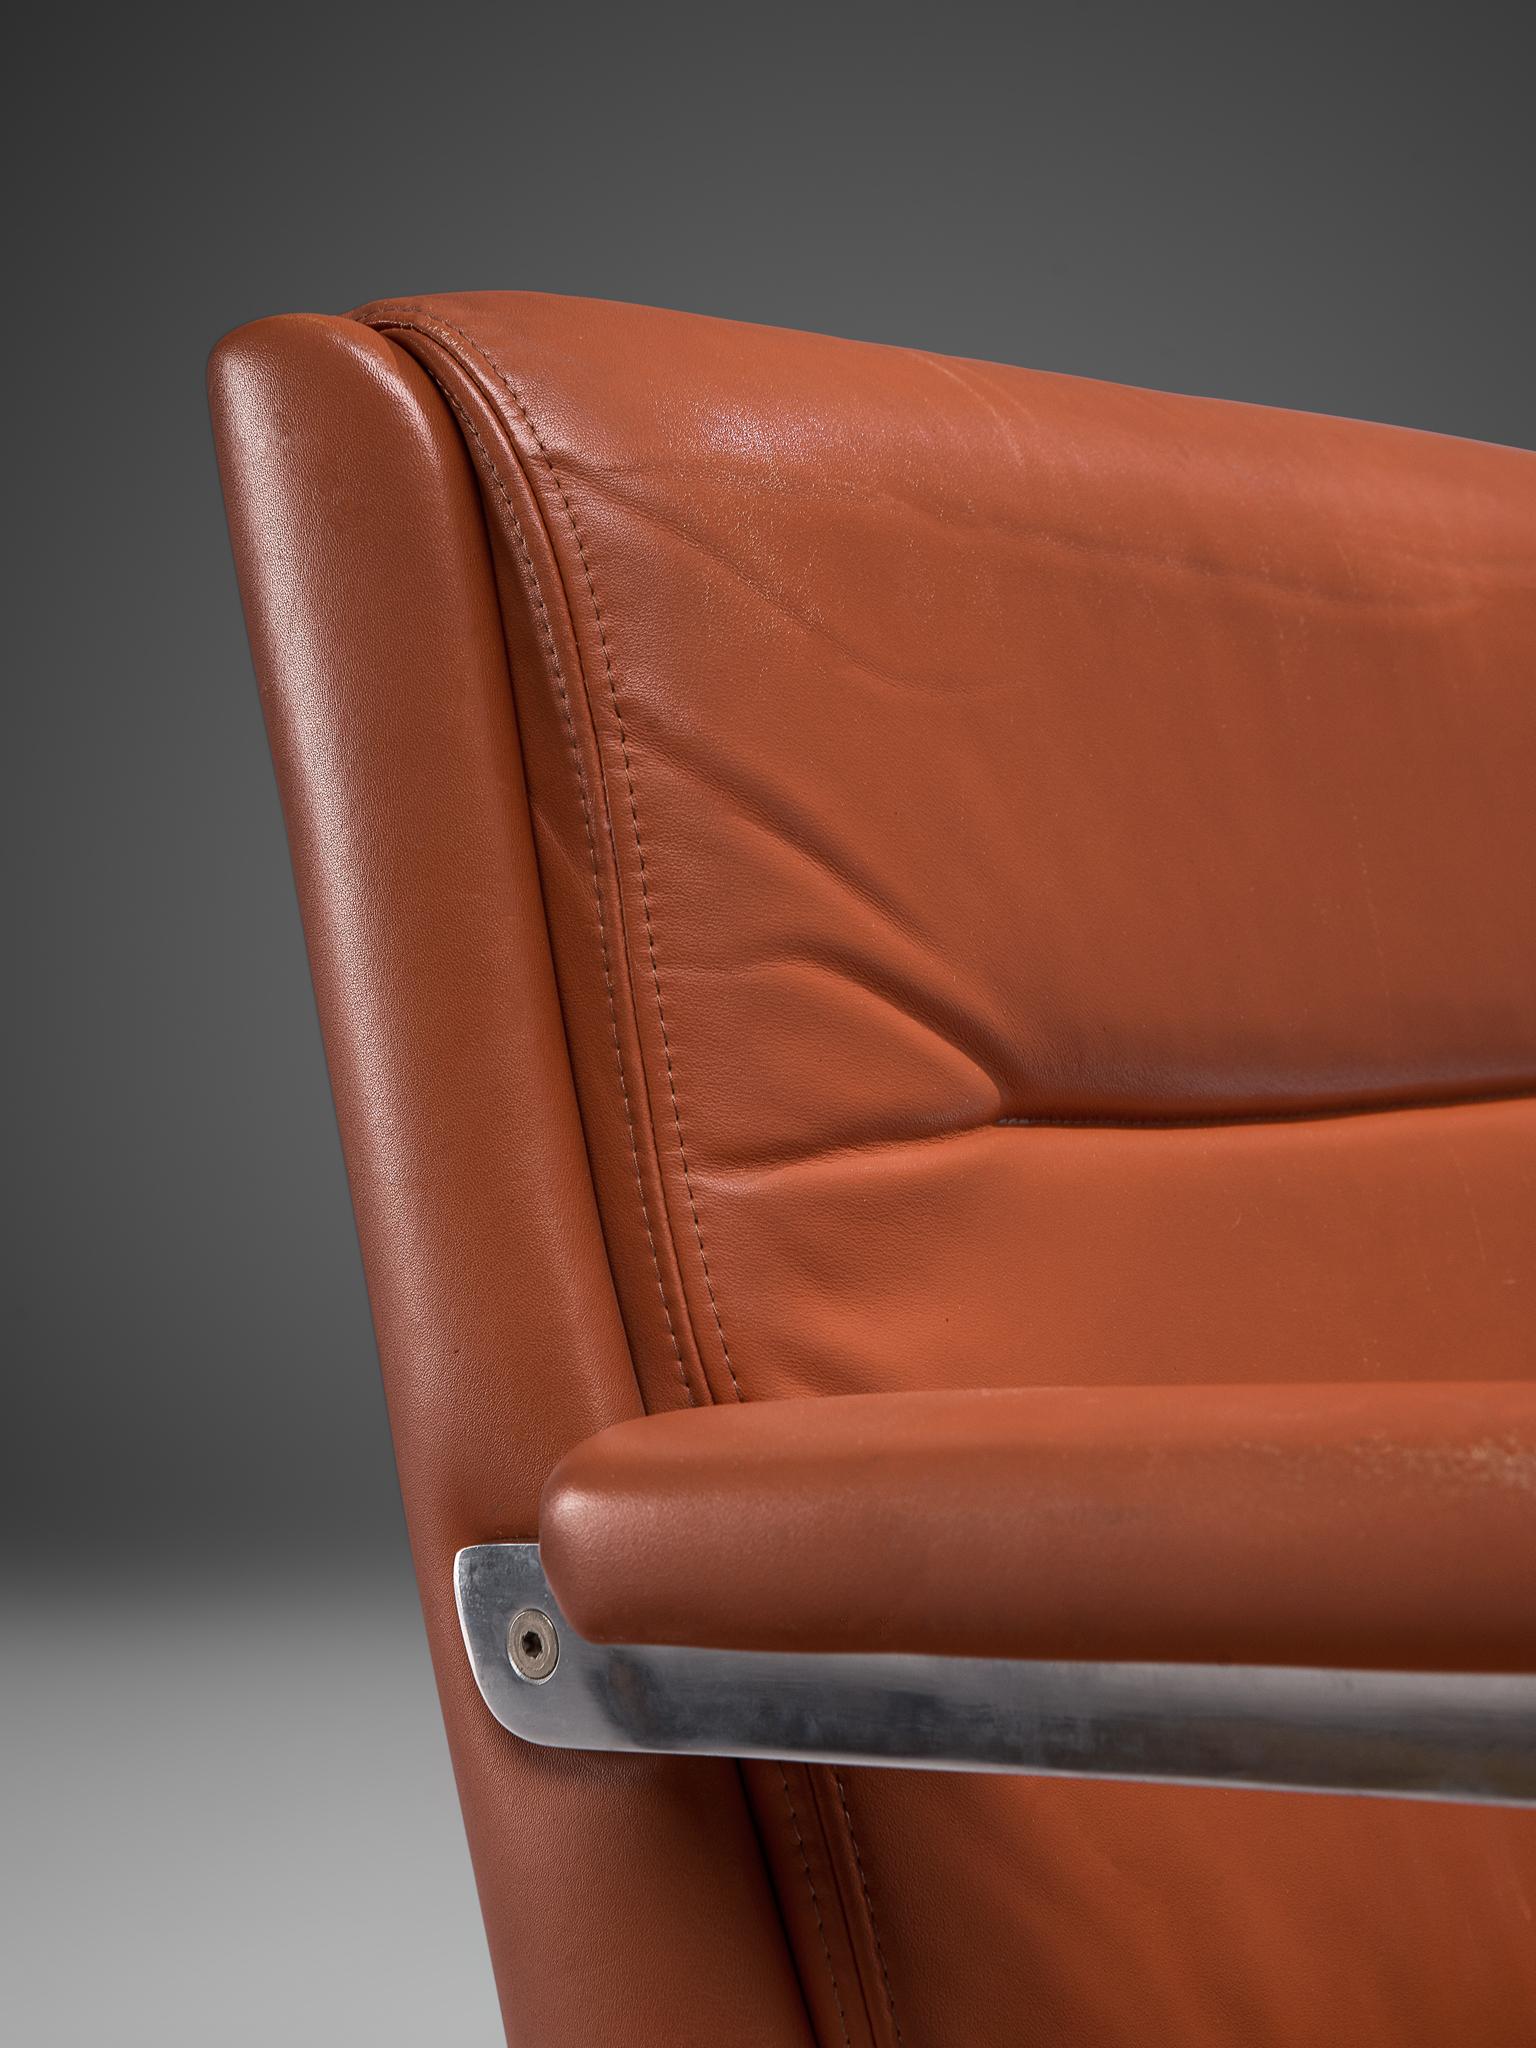 Six Norwegian Office Chairs in Terracotta Leather 1